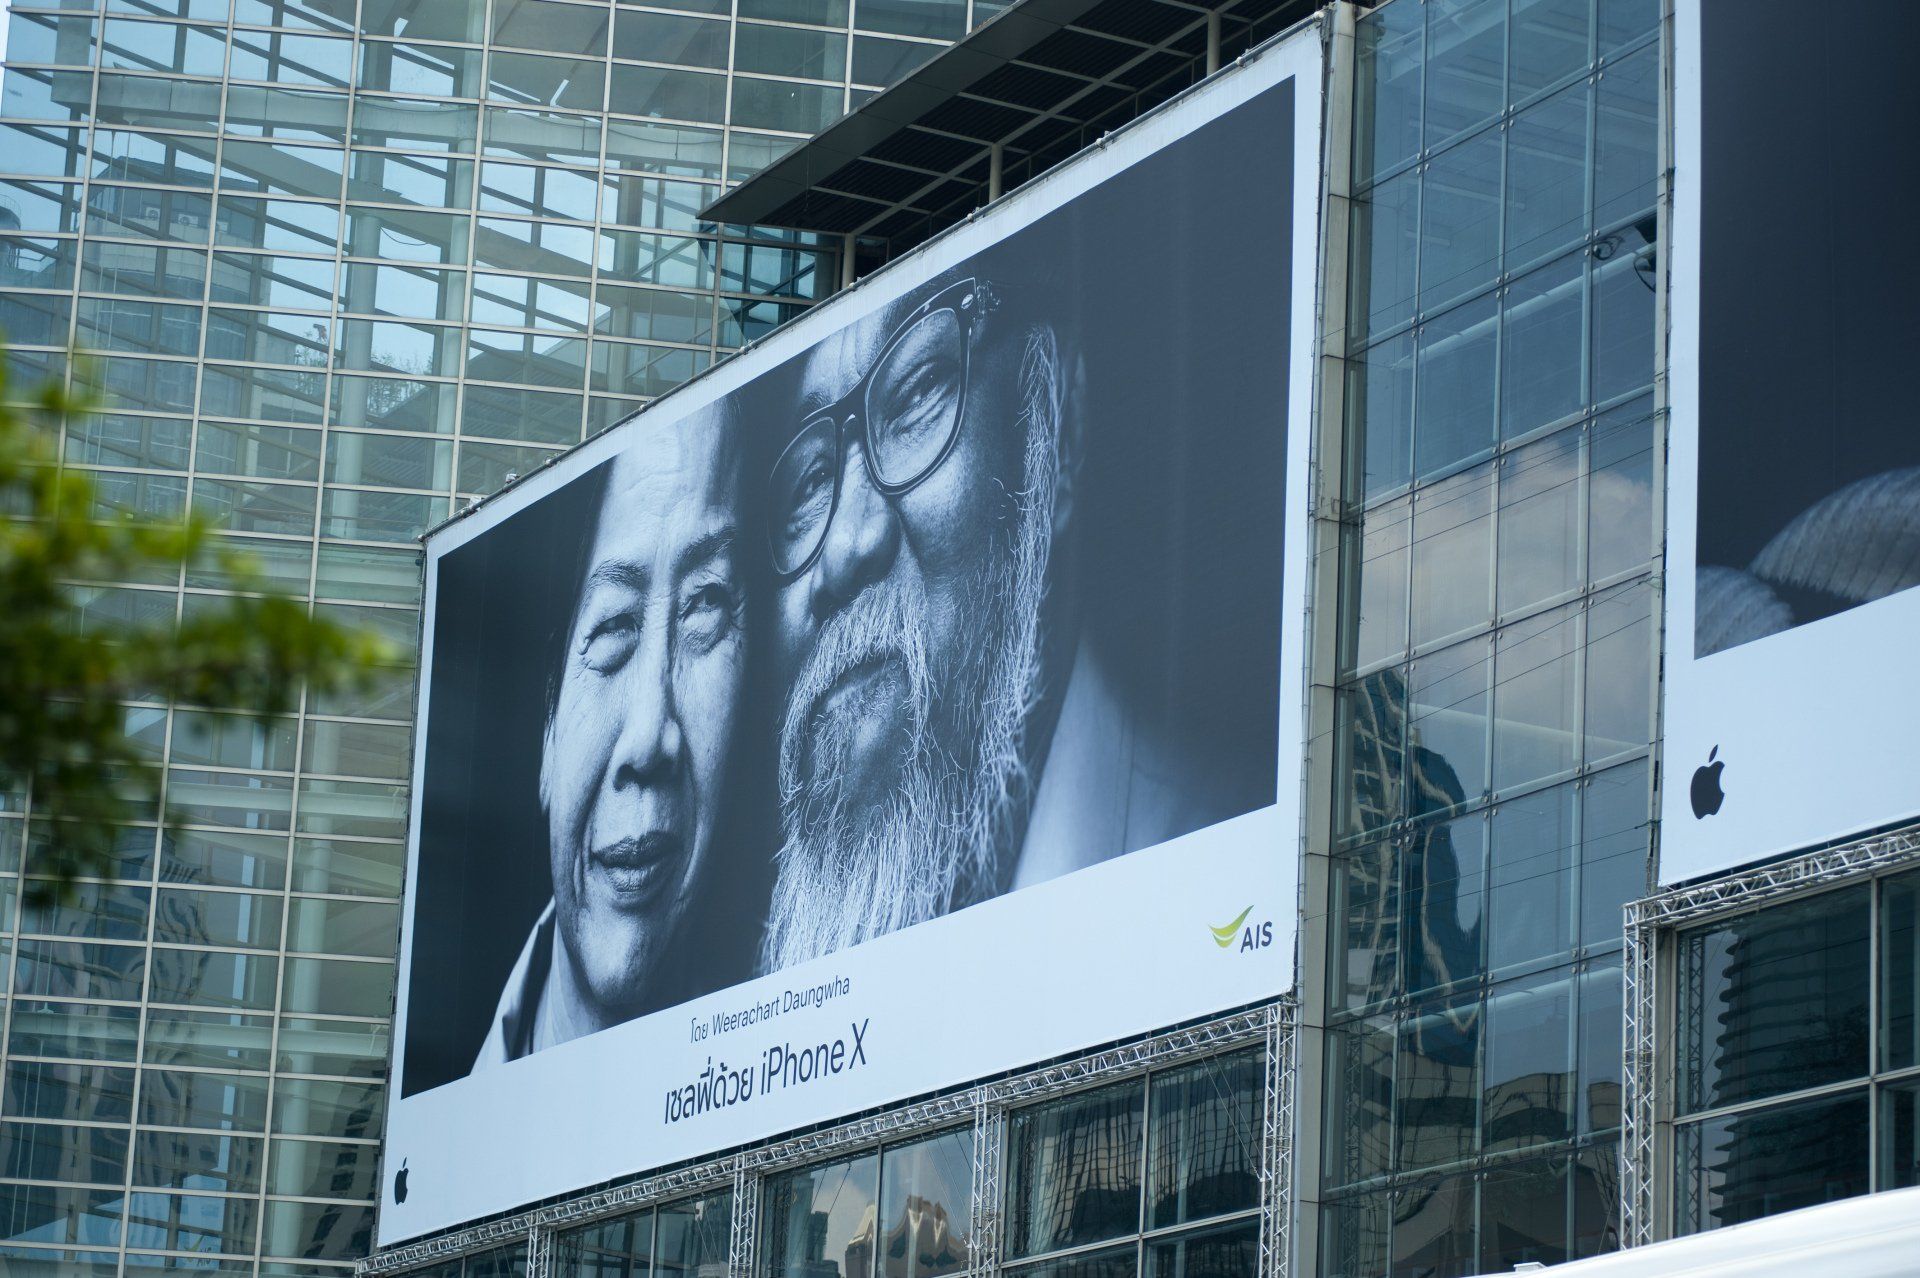 A large billboard on the side of a building shows a man with glasses and a beard.